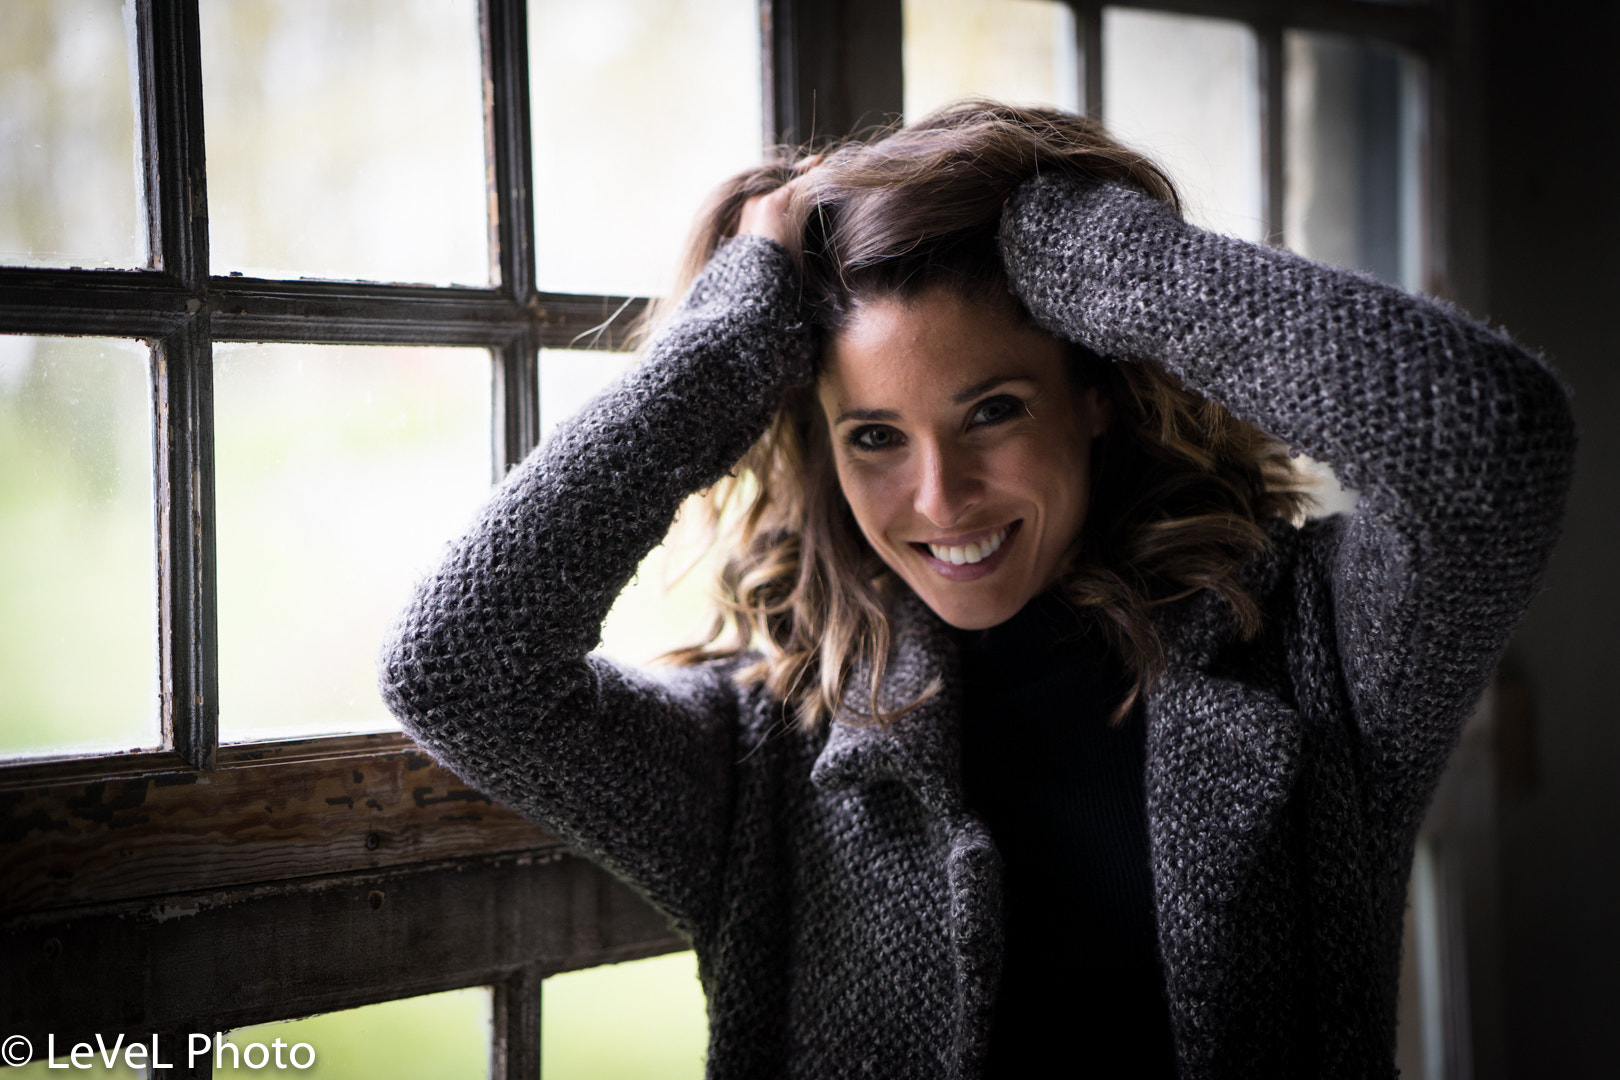 Sony a7 sample photo. Laura bazan 33/ unretouched/natural light photography